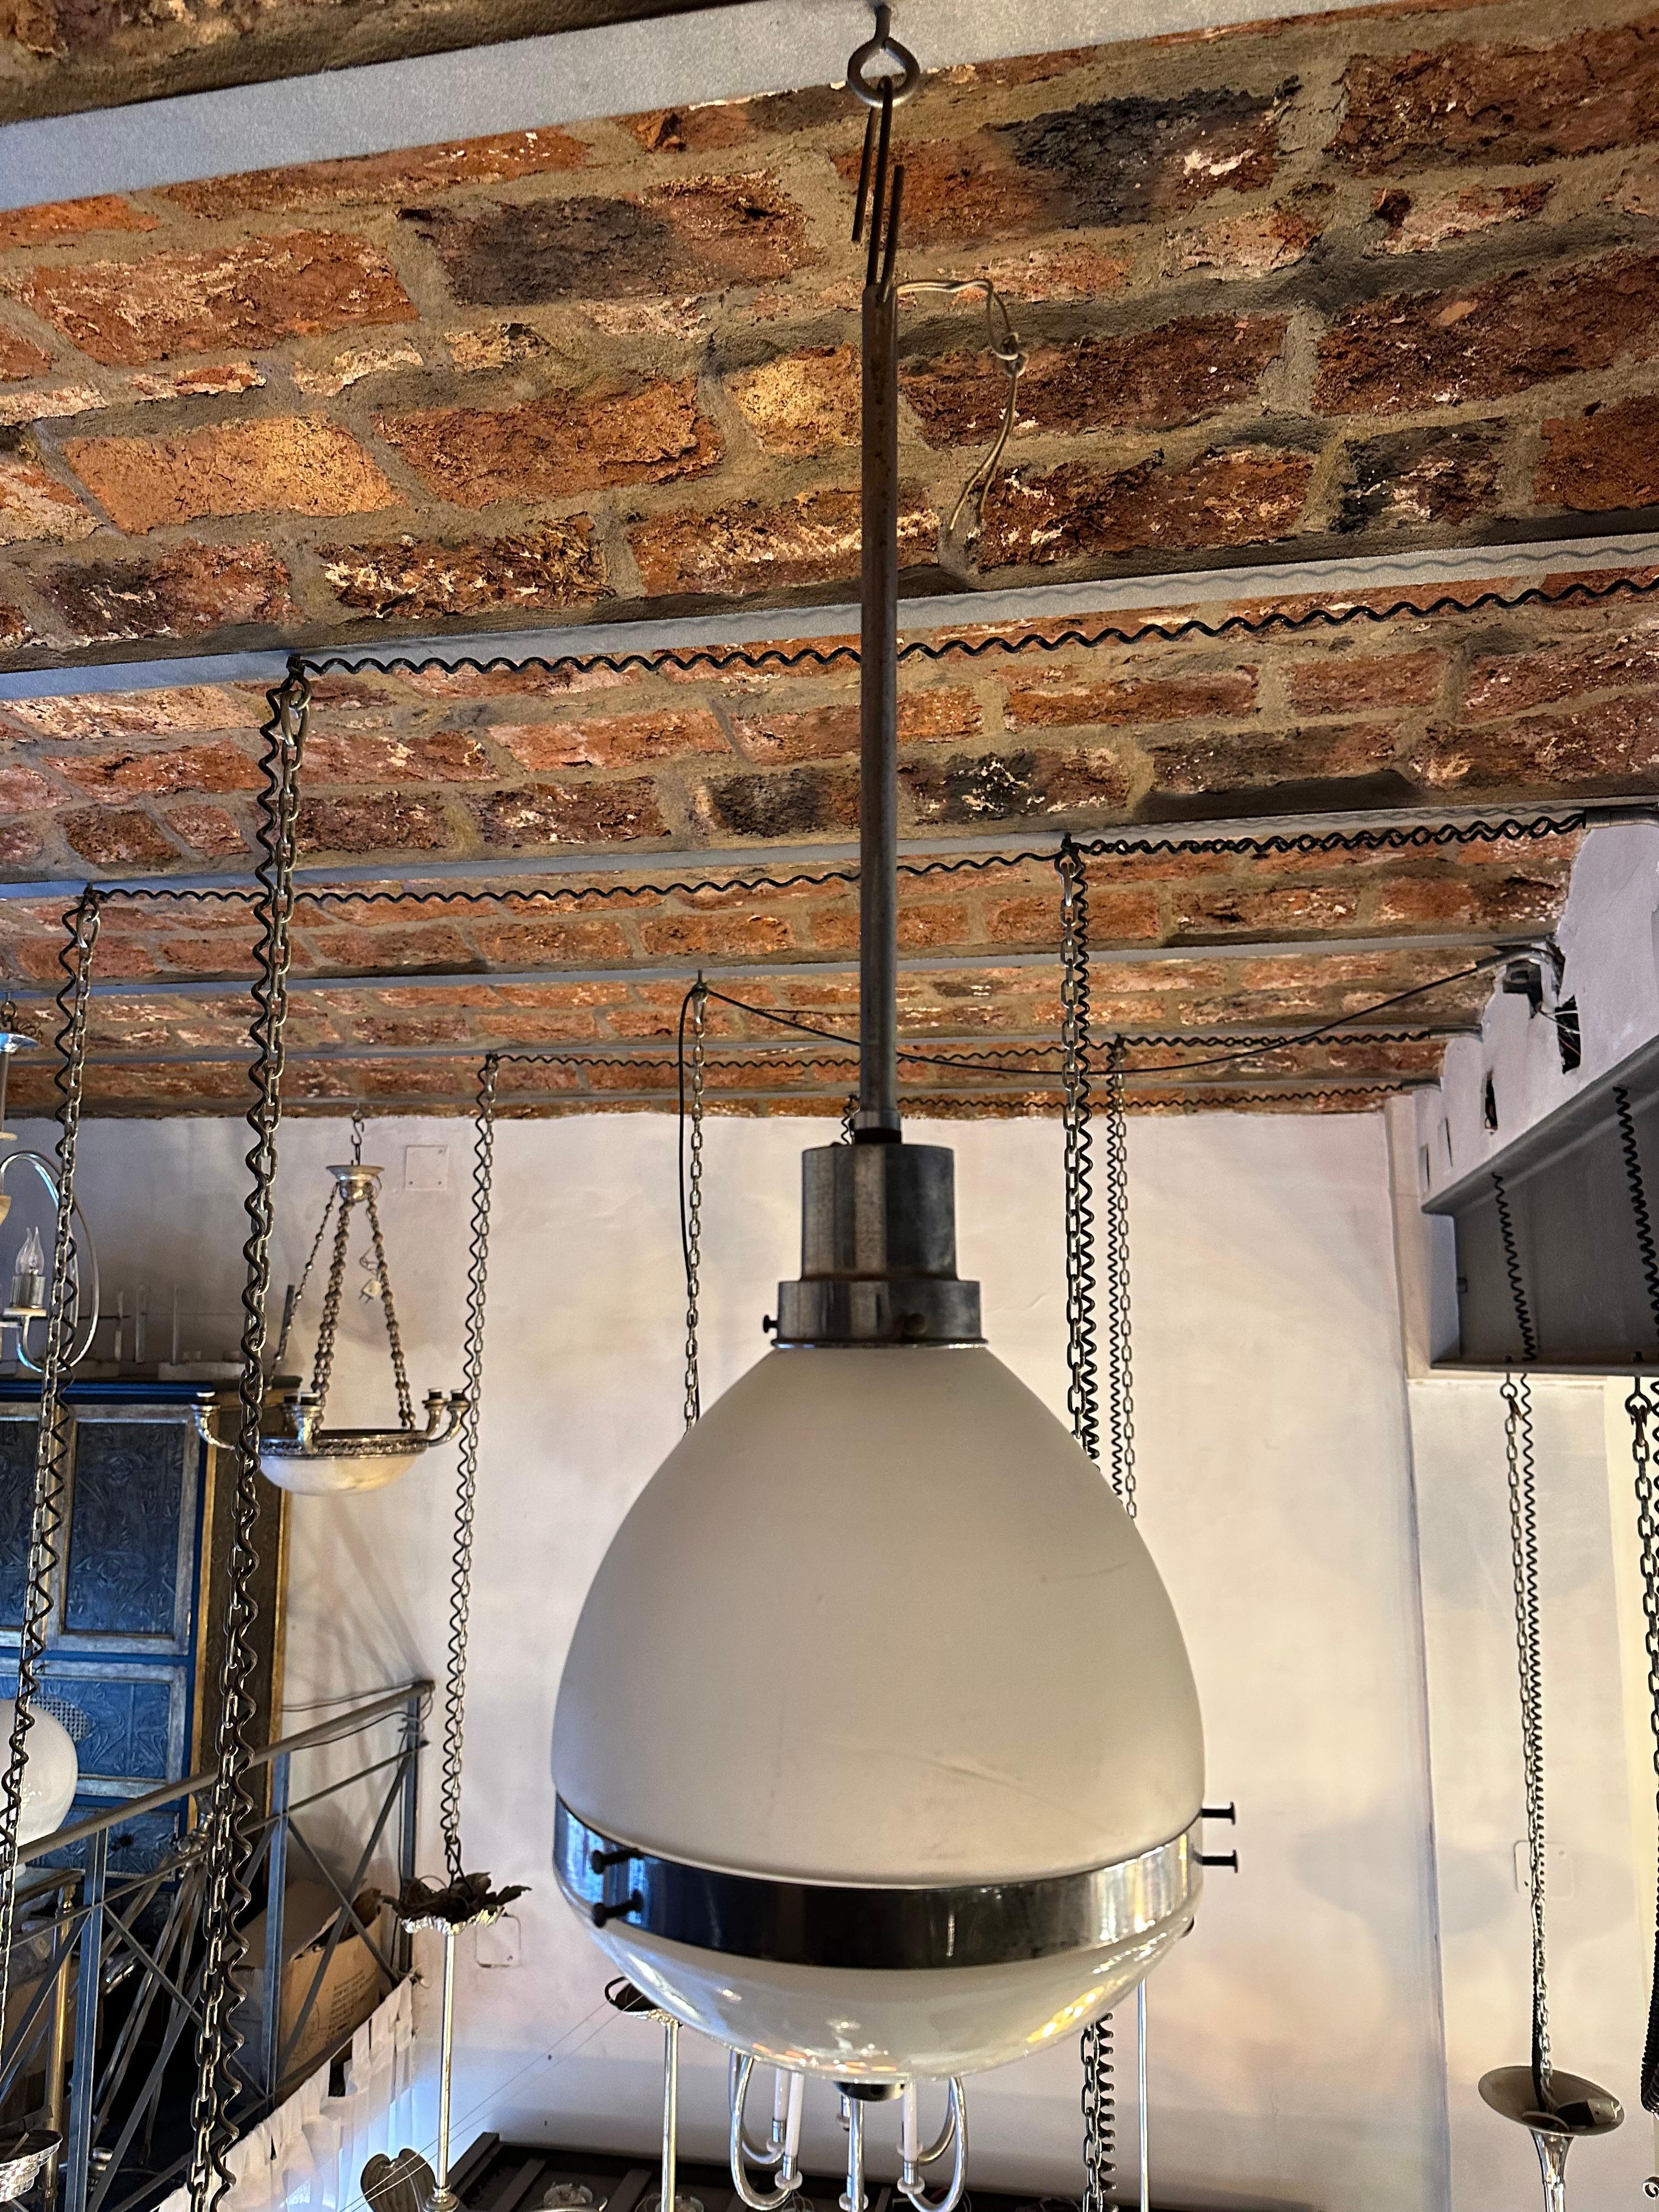 Hanging lamp.
Style: Art Deco
To take care of your property and the lives of our customers, the new wiring has been done.
We have specialized in the sale of Art Deco and Art Nouveau and Vintage styles since 1982. If you have any questions we are at